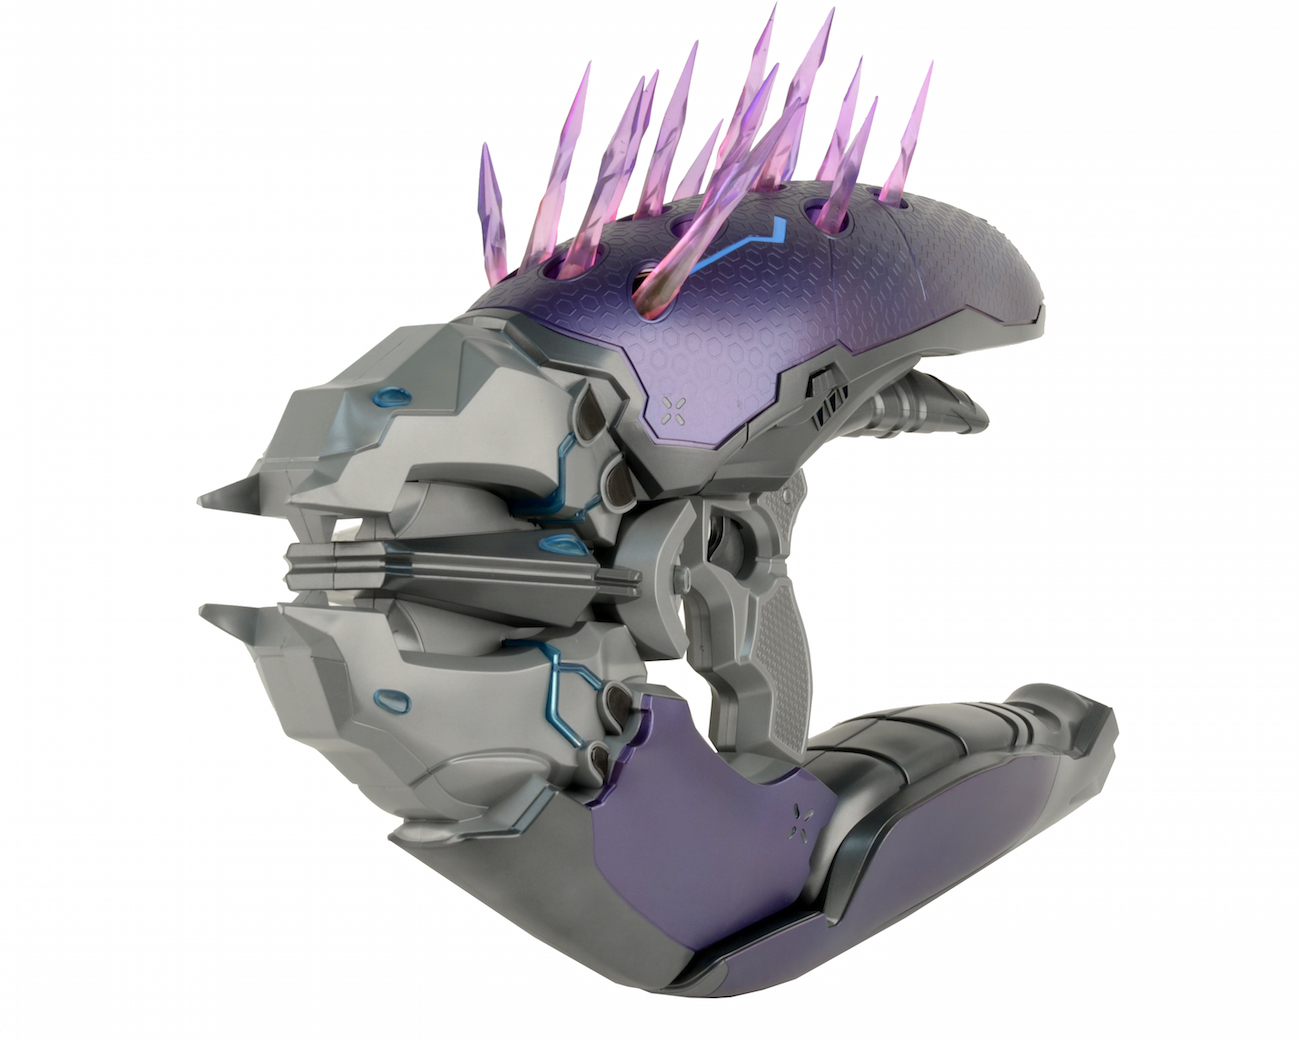 UPDATED: Pre-Order the Limited Edition Halo® Needler Replica Now! – NECA